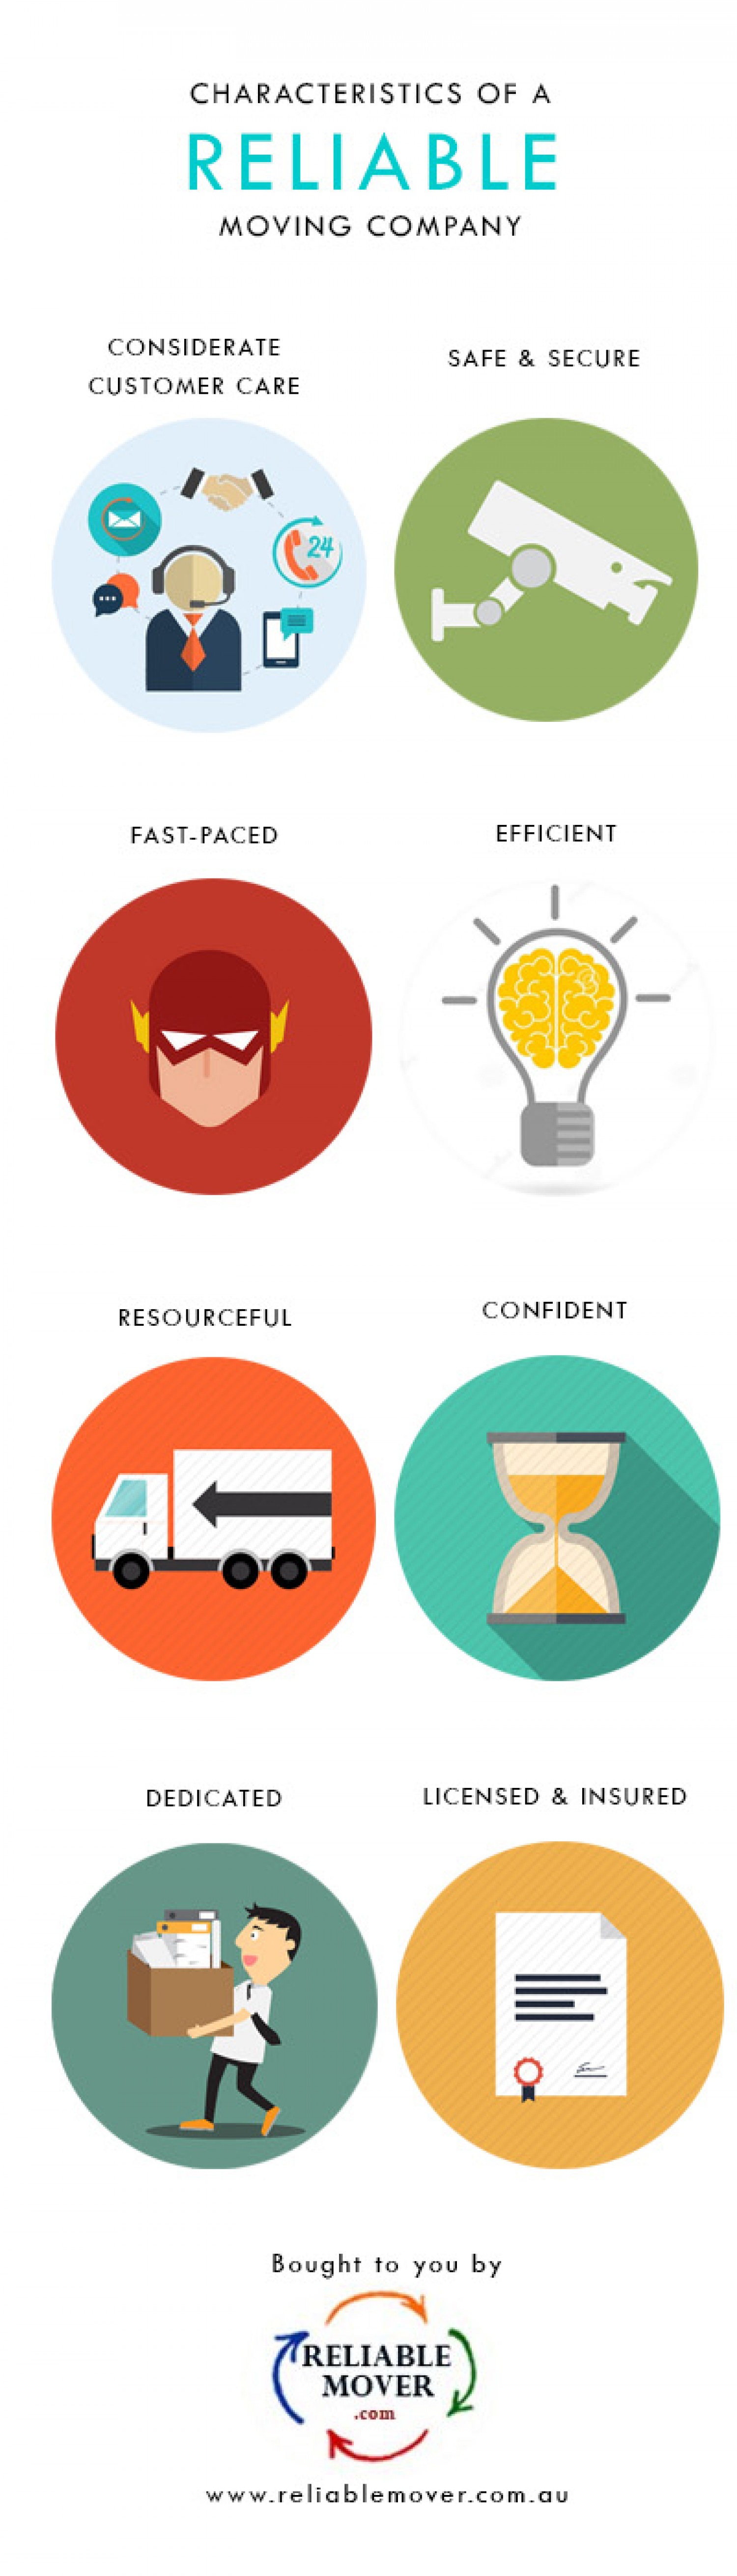 Characteristics of a Reliable Moving Company Infographic